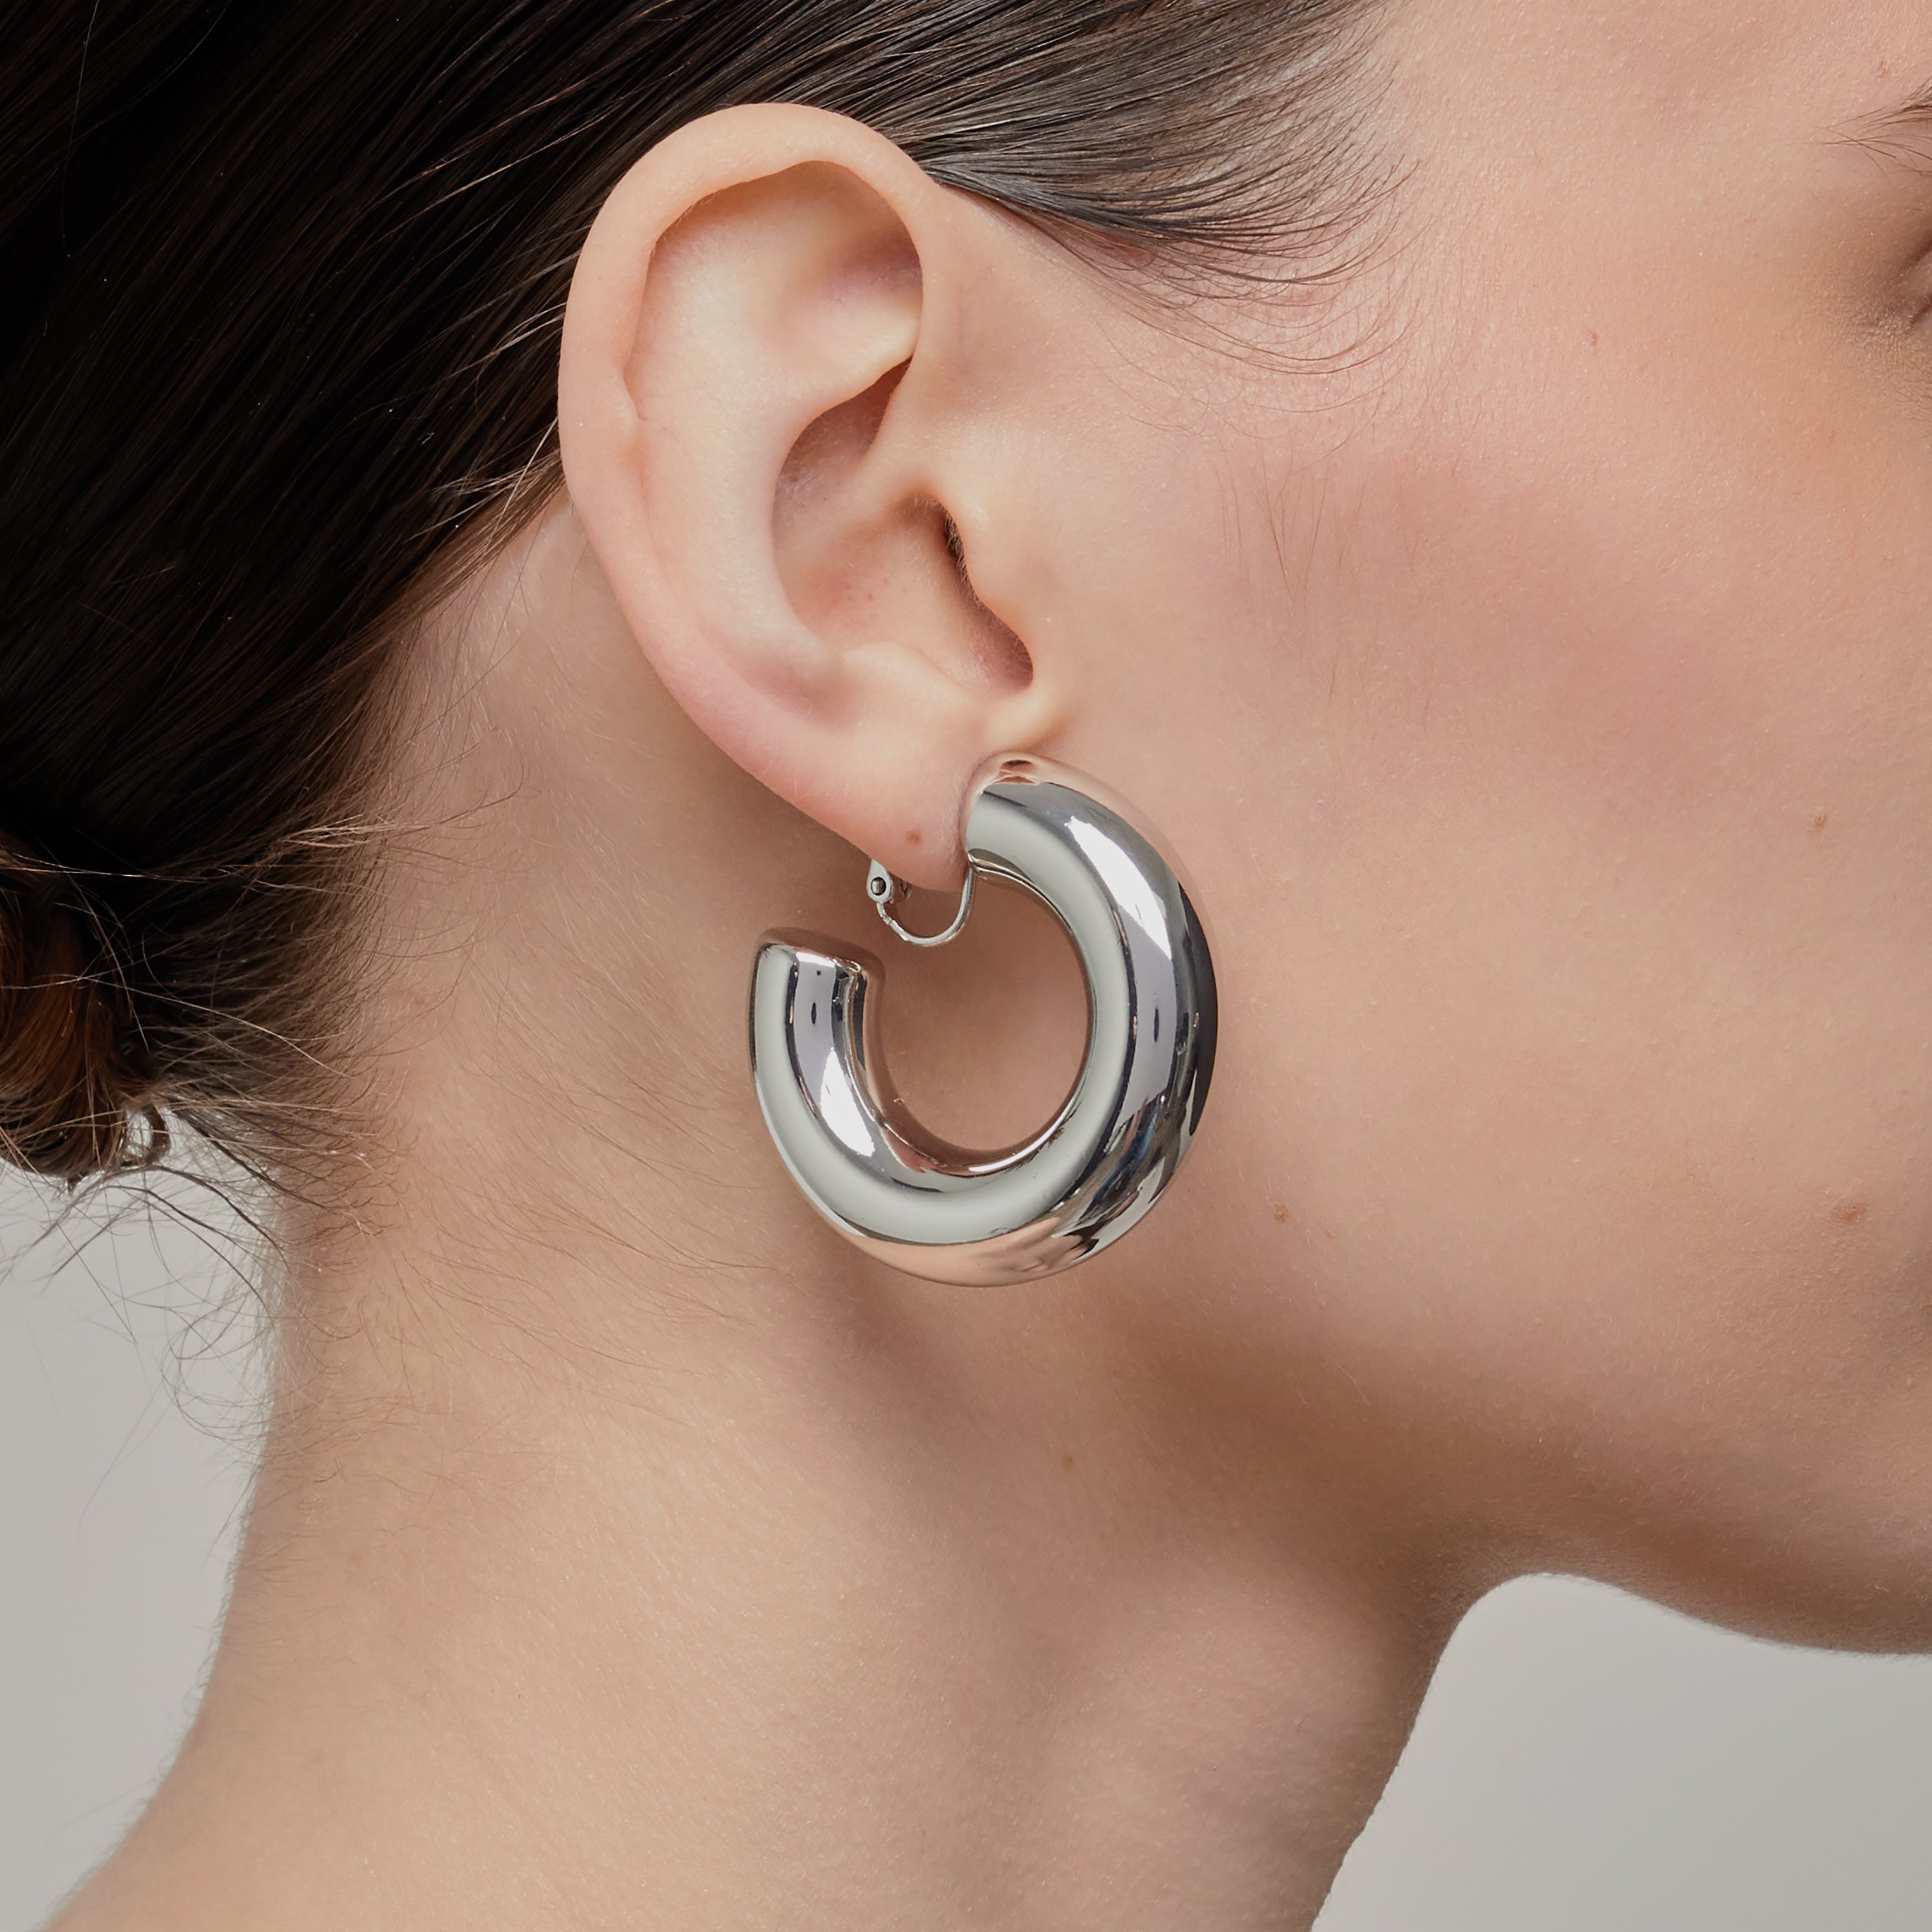 A model wearing the Chunky Hoop Clip On Earrings in Silver. With a secure screwback closure, these earrings are suitable for a variety of ear sizes, including sensitive and keloid-prone ears. Designed for long-lasting wear and can be manually adjusted for a perfect fit. Note: includes one pair.